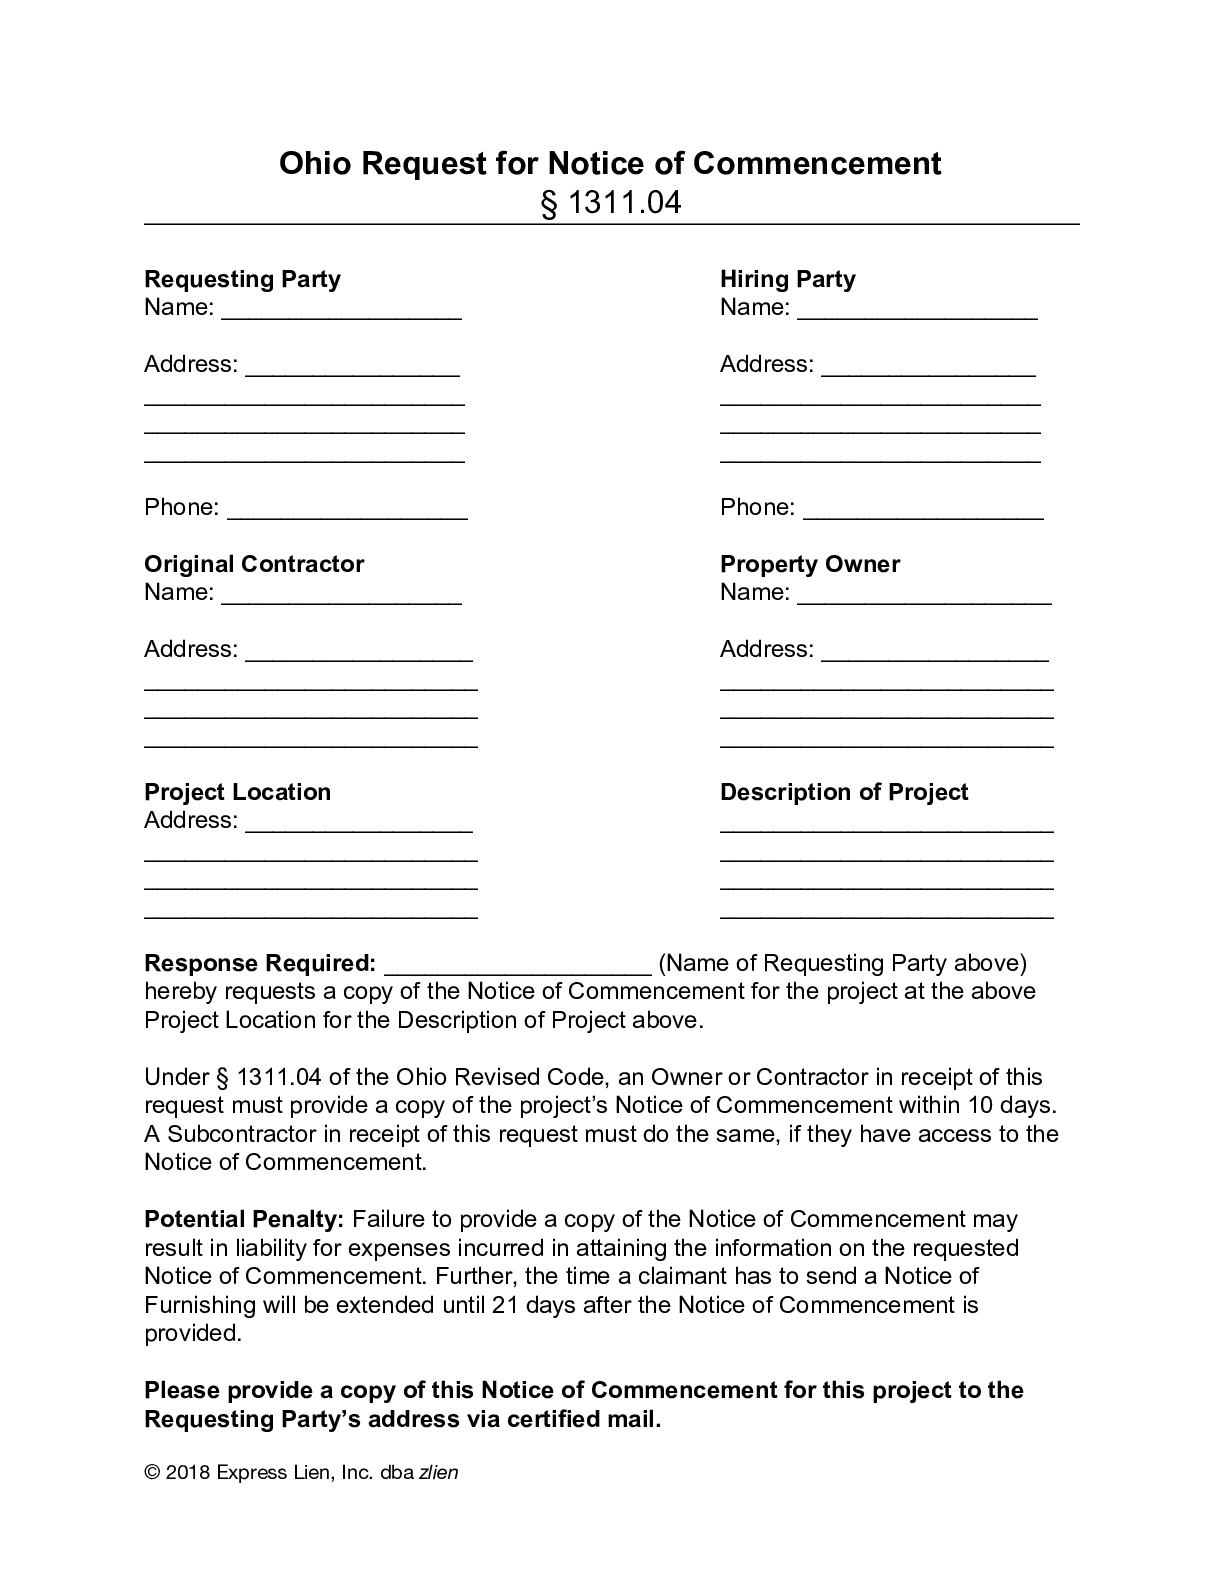 Ohio Request for Notice of Commencement Form - free from